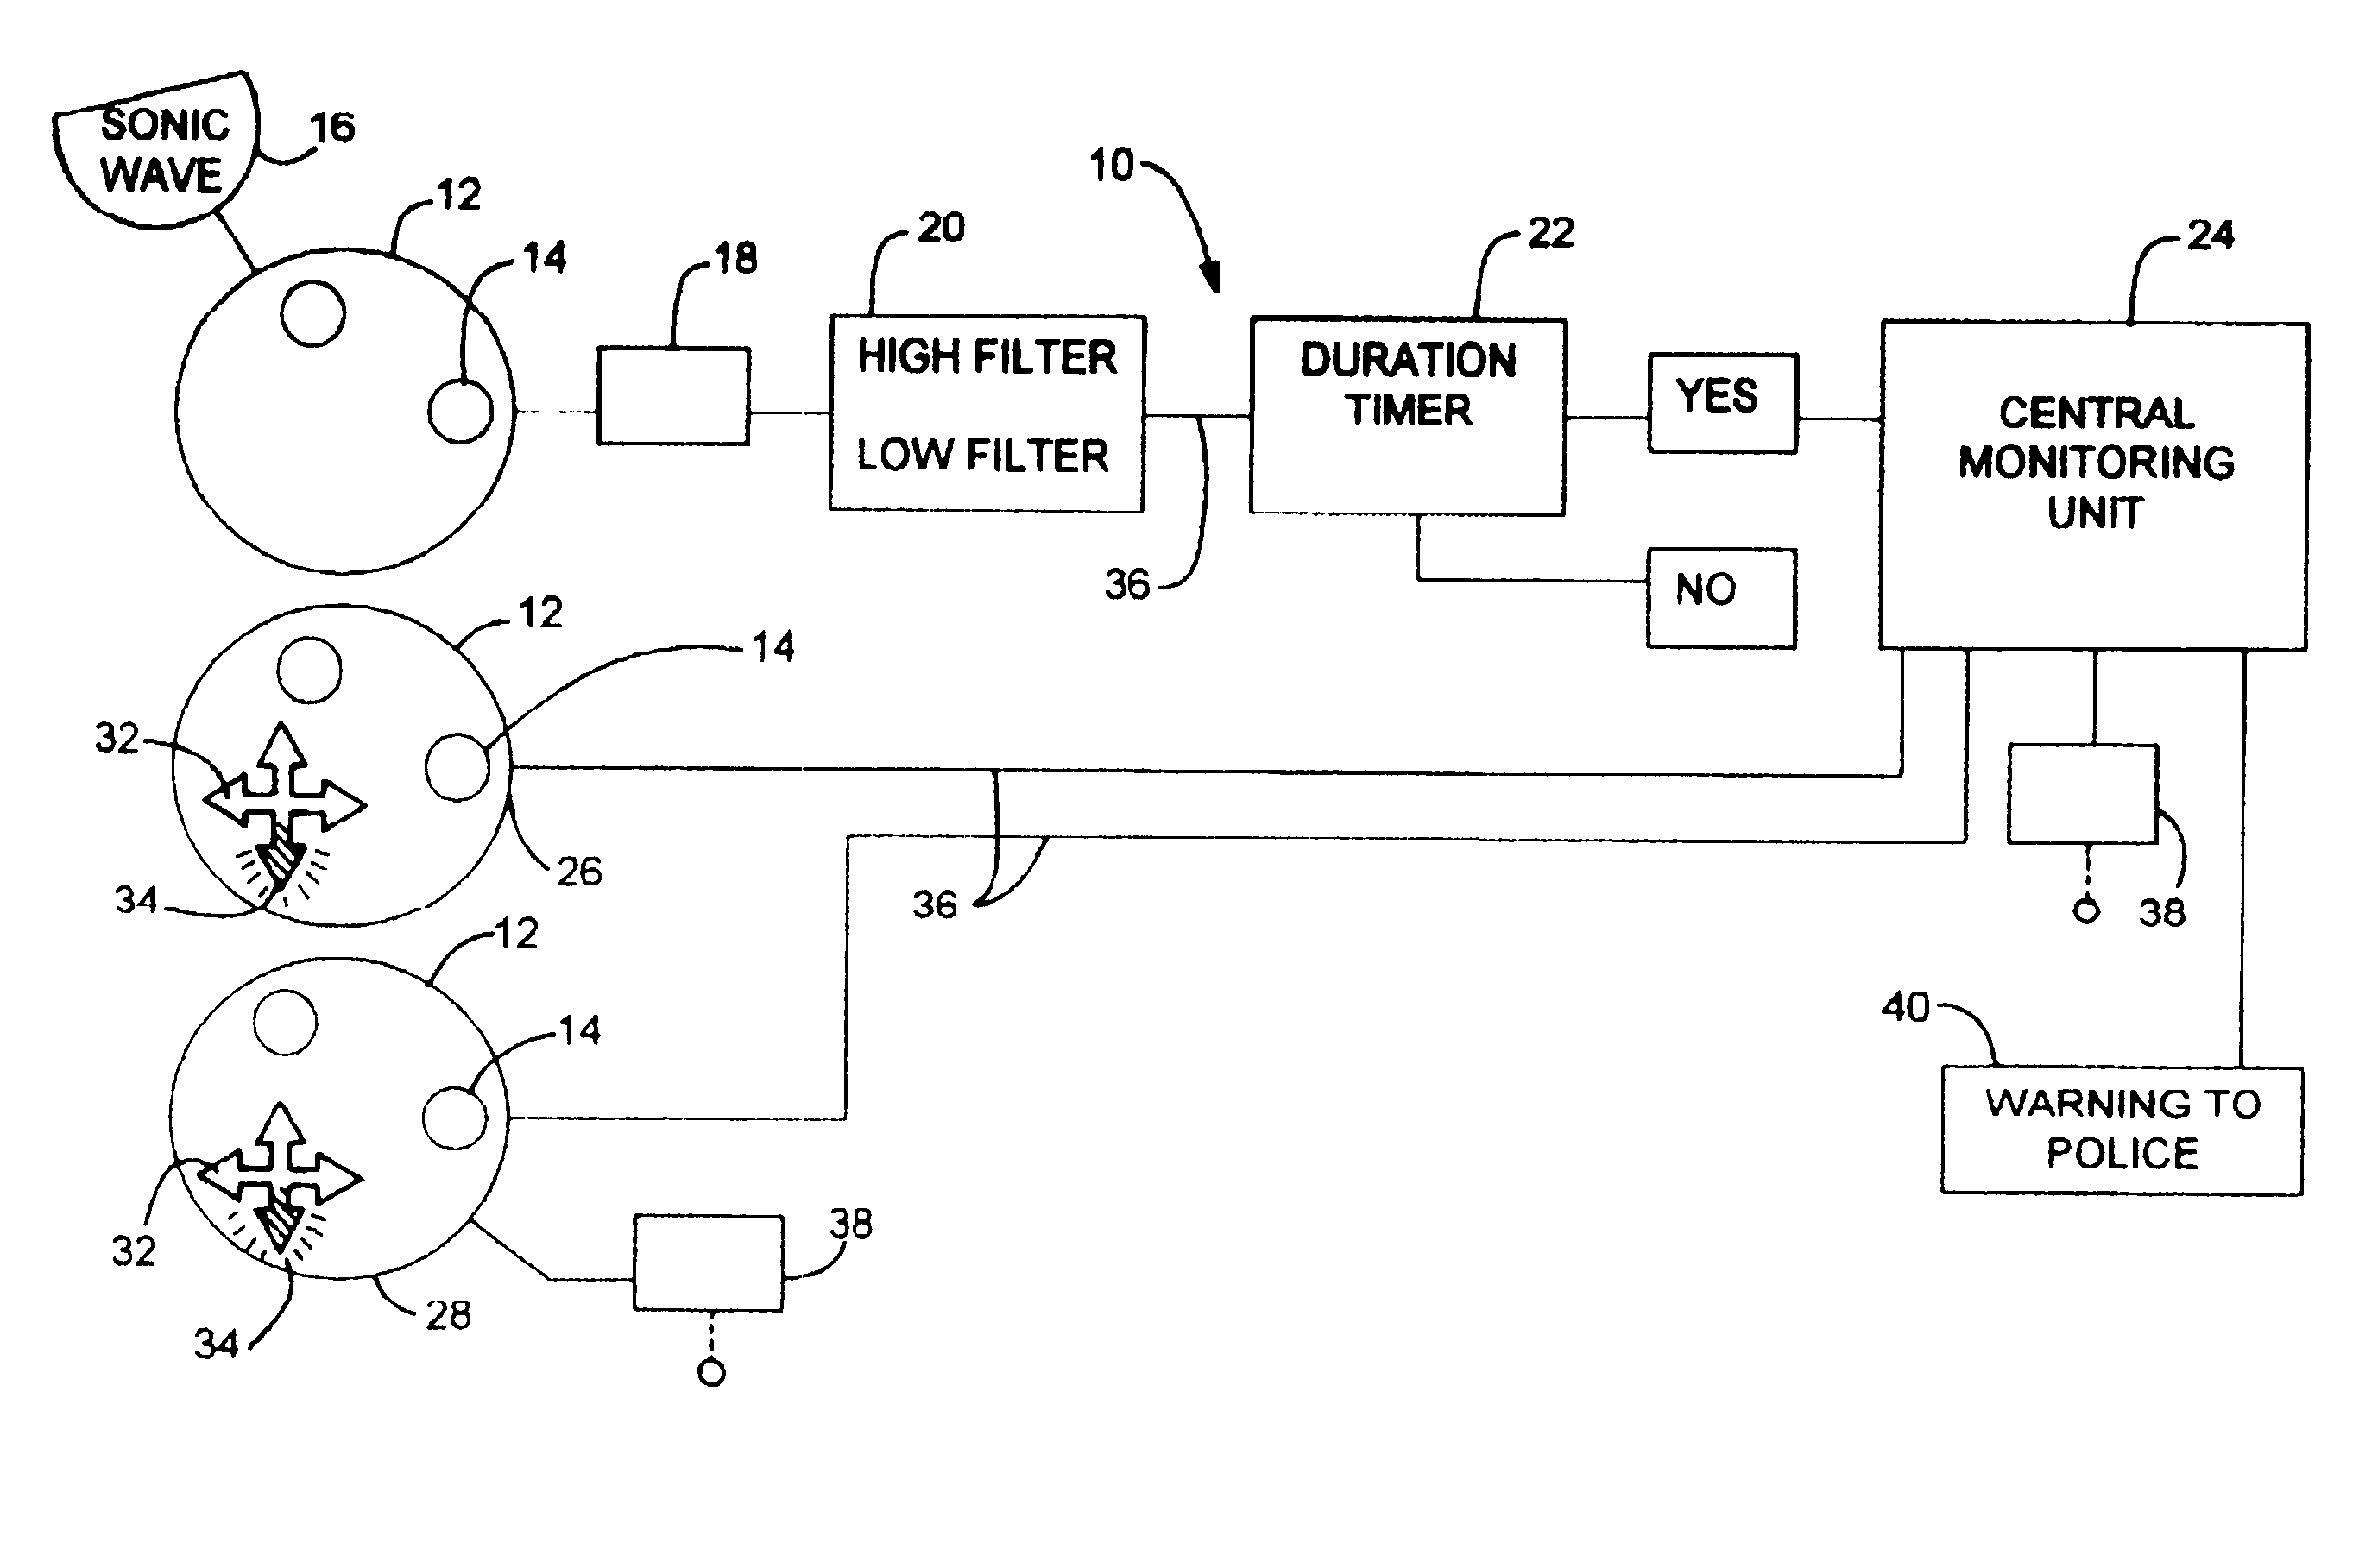 Firearm discharge detection device and warning system